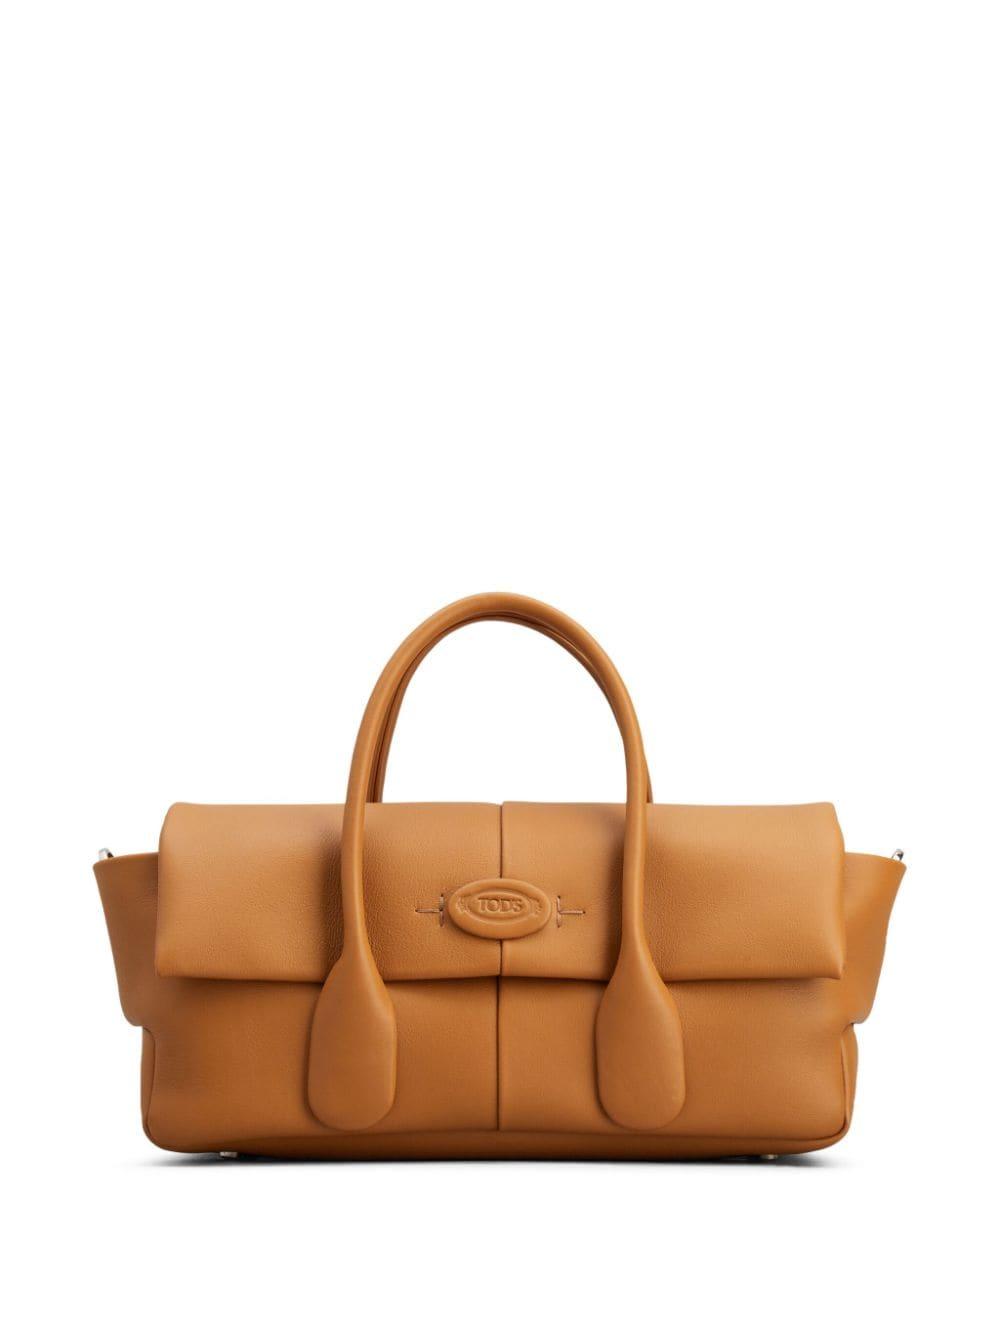 TOD'S Light Brown Leather Handbag - Reversible Flap with Adjustable Strap